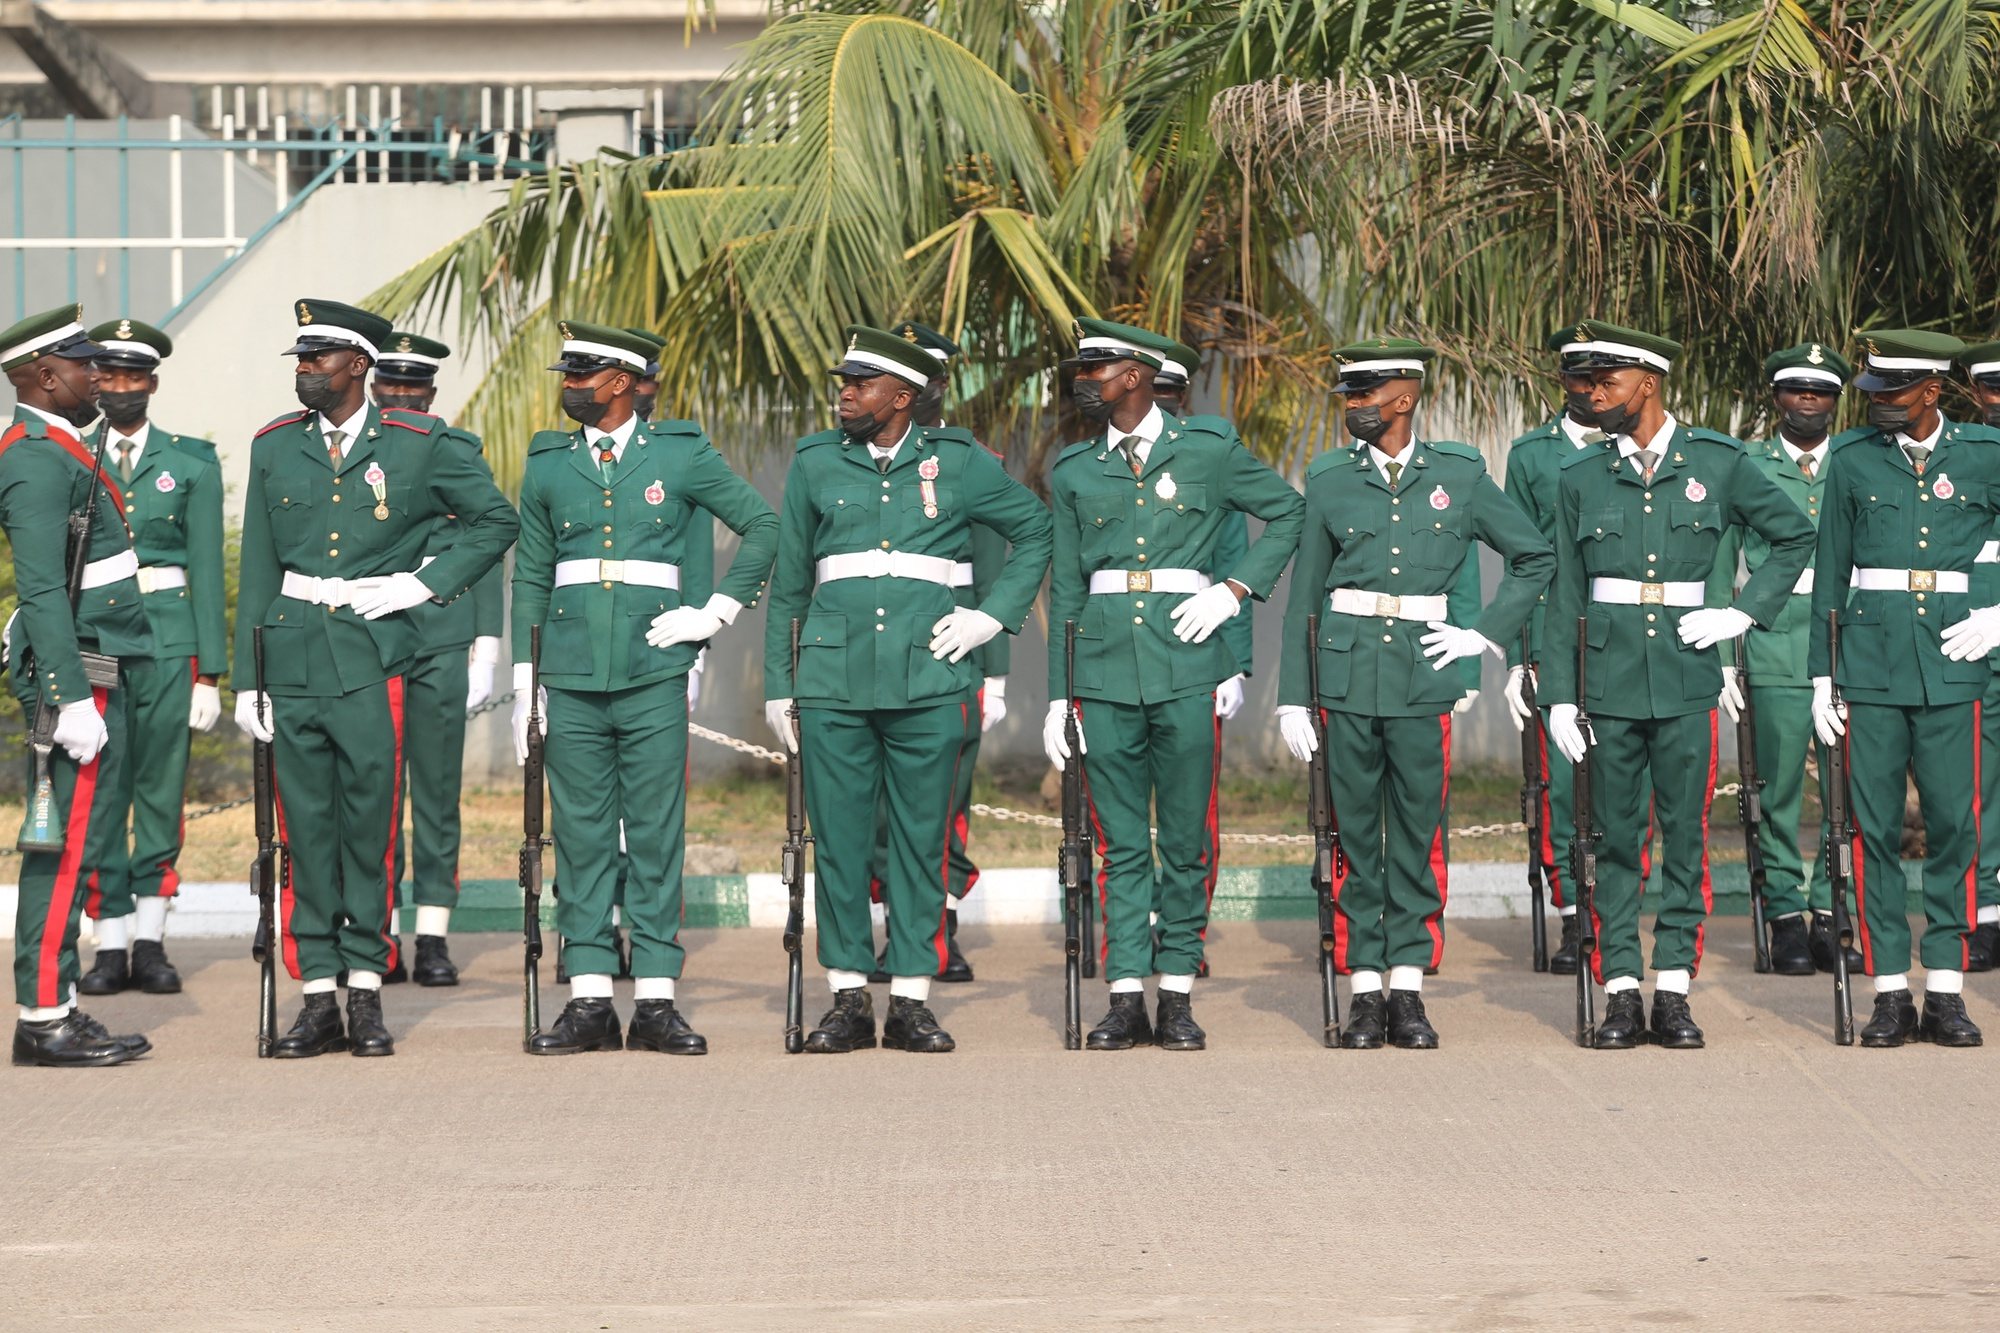 epa09687132 Soldiers stand in line on a parade ground during the celebration marking the Nigerian armed forces remembrance day at the military arcade in Lagos, Nigeria 15 January 2022. Nigeria celebrates armed forces remembrance day amidst security challenges to honour the military fallen heroes. It is an annual event held every 15 January across the 36 states of Nigeria.  EPA/Akintunde Akinleye